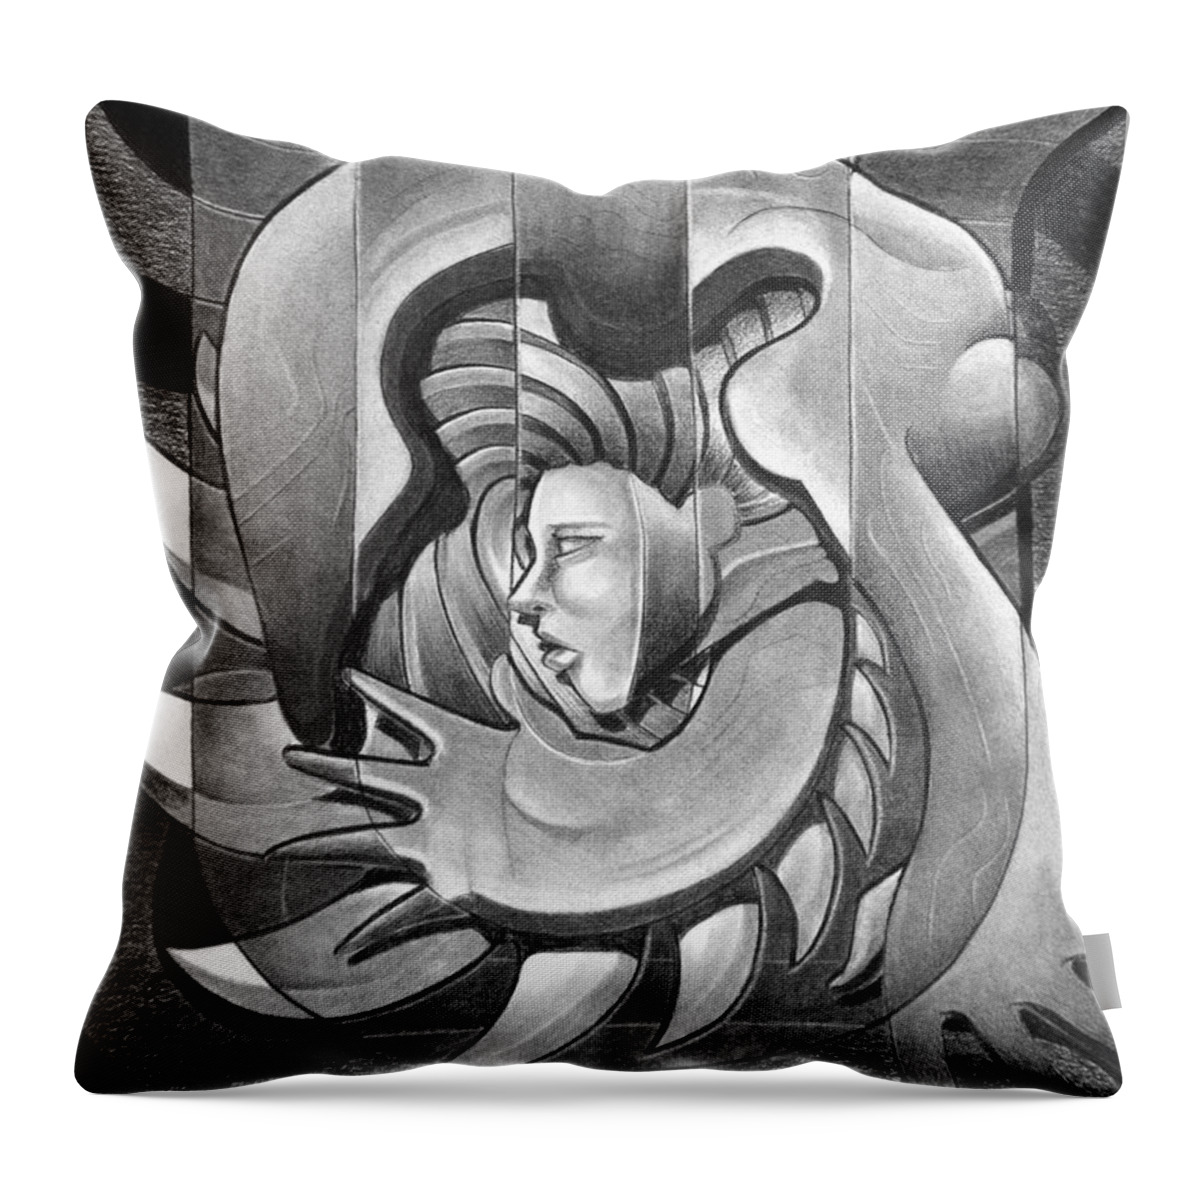 Art Throw Pillow featuring the drawing Trip by Myron Belfast